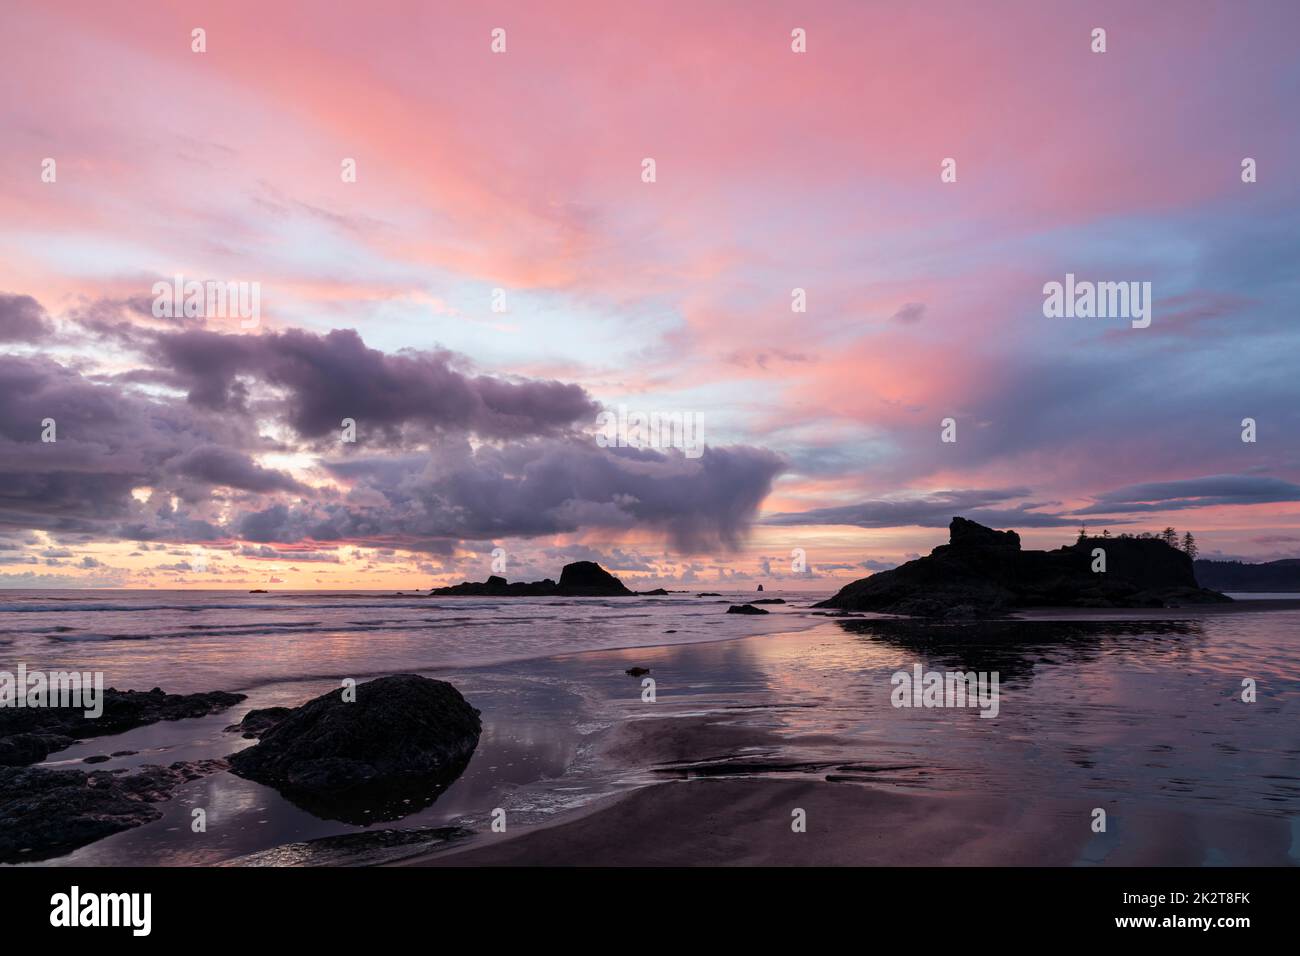 WA22057-00...WASINGTON - Dusk at Ruby Beach on the Pacific Coast in Olympic National Park. Stock Photo